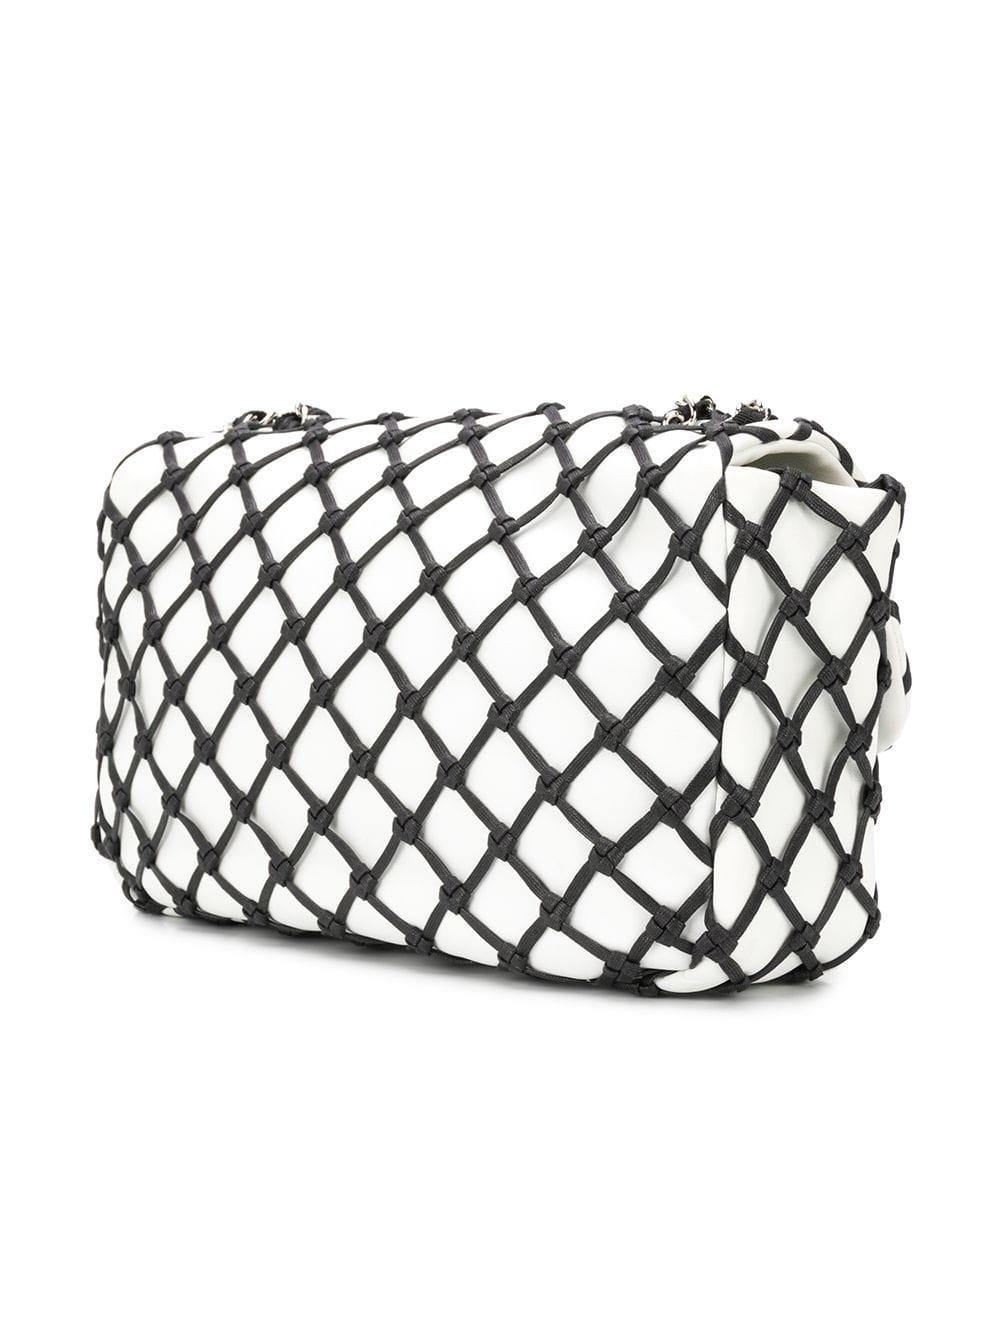 For a dazzling twist on the classic Chanel flap bag, look no further. This edgy Jumbo Canebiers piece playfully mimics the house's iconic diamond quilted fabrications with its black mesh effect nylon netting. Featuring the brands signature details,